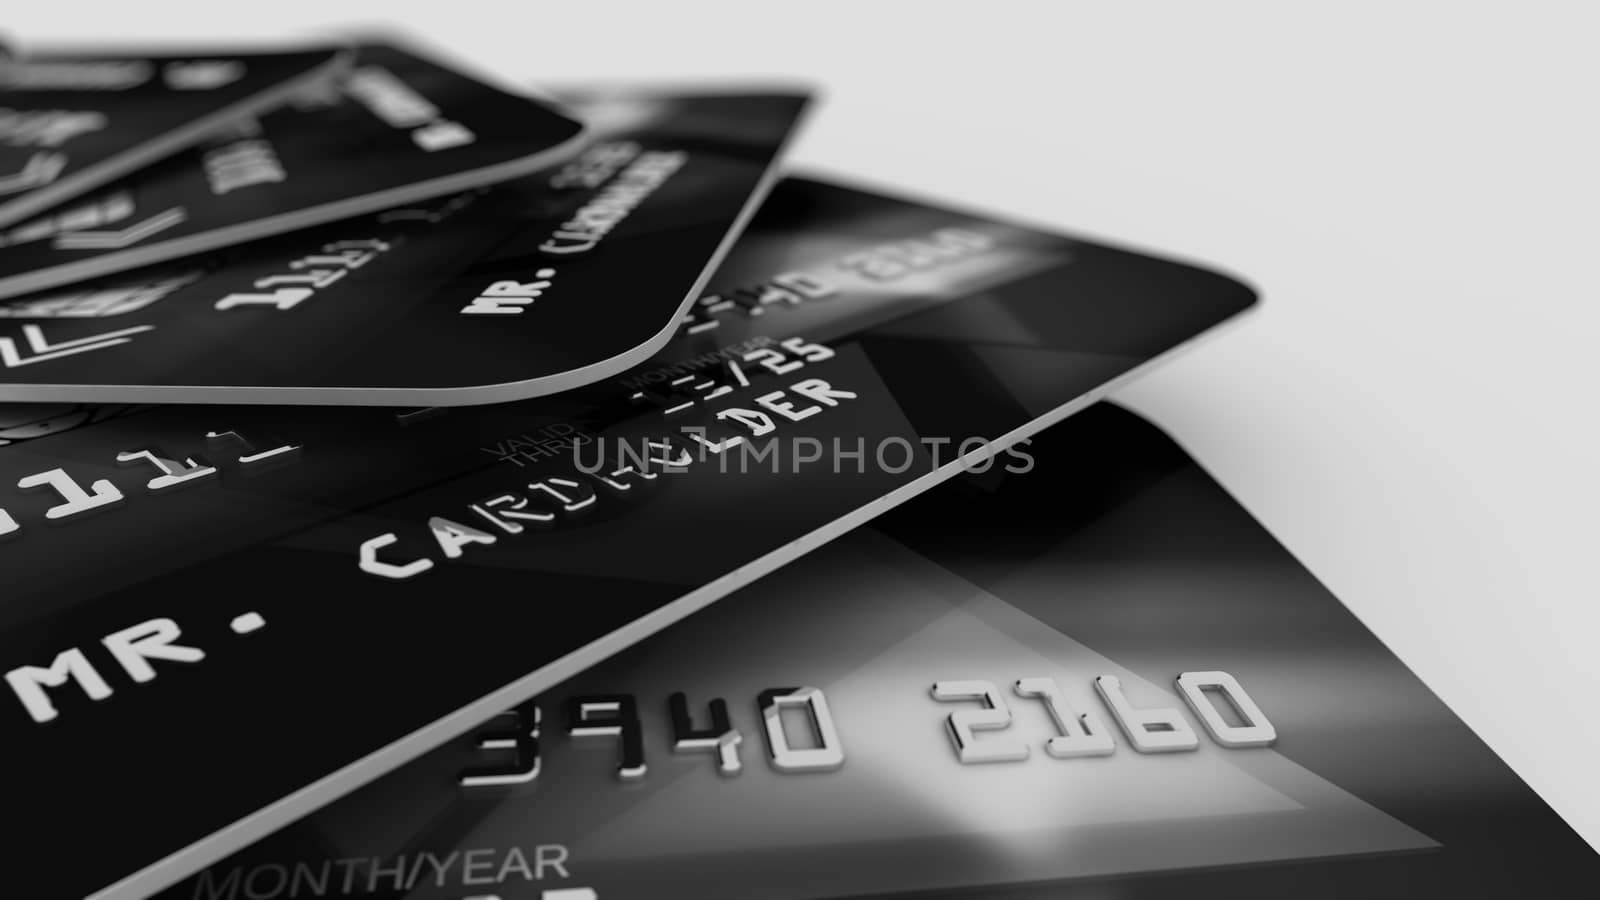 Many Black Credit Cards in White Studio by klss